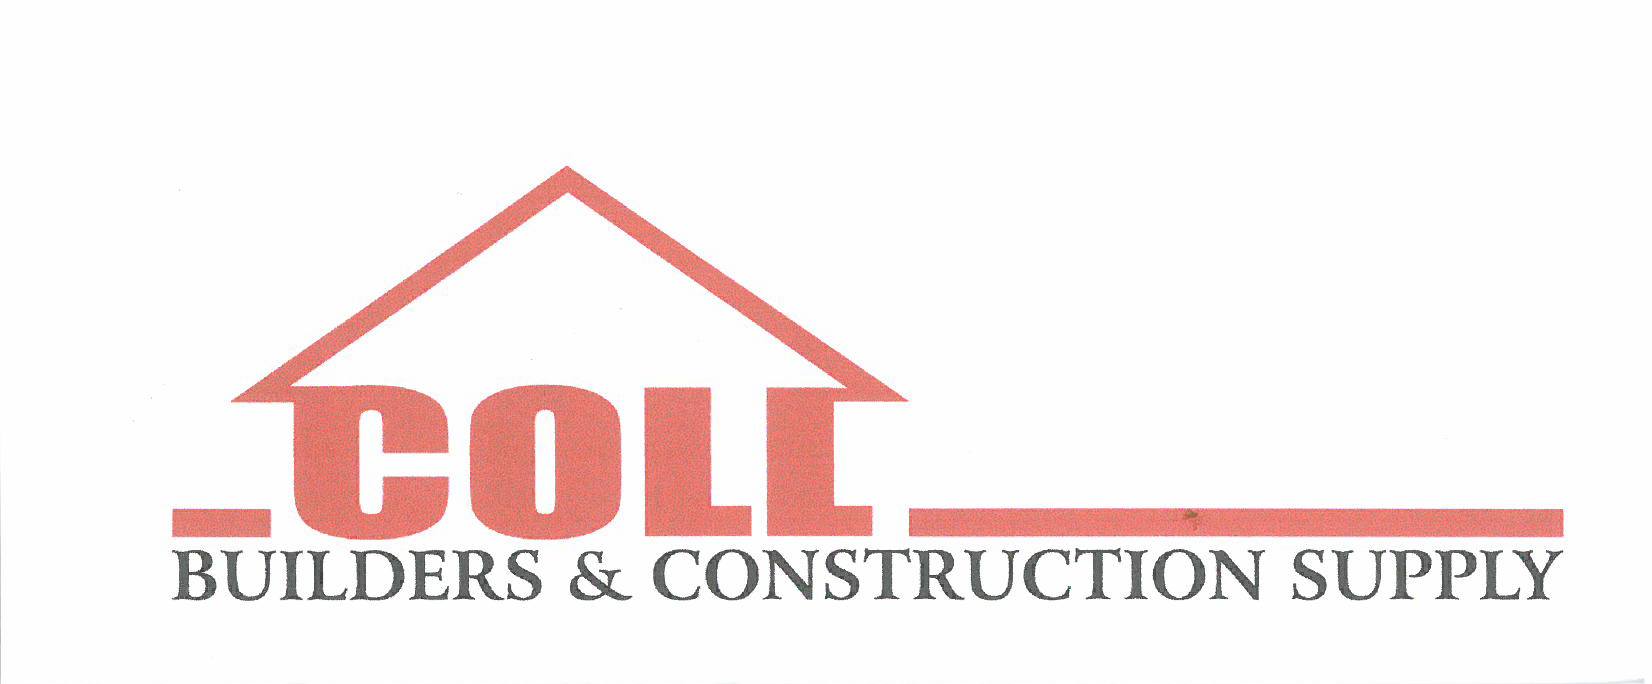 Coll Builders And Construction Supply In Bohol Logo